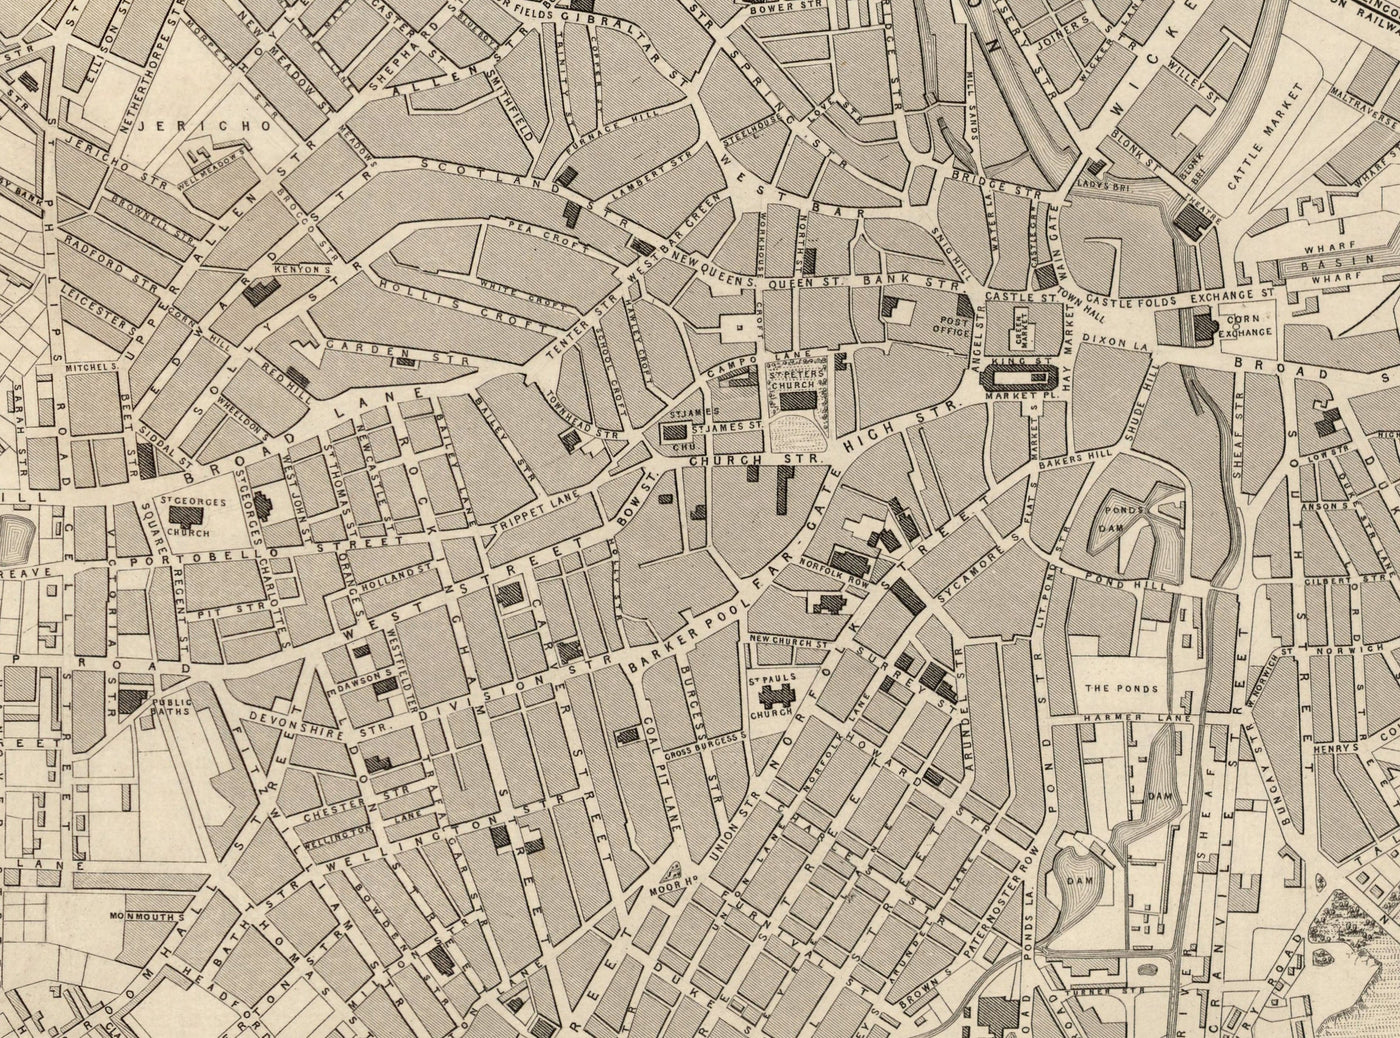 Old Map of Sheffield, Yorkshire in 1851 by Tallis & Rapkin